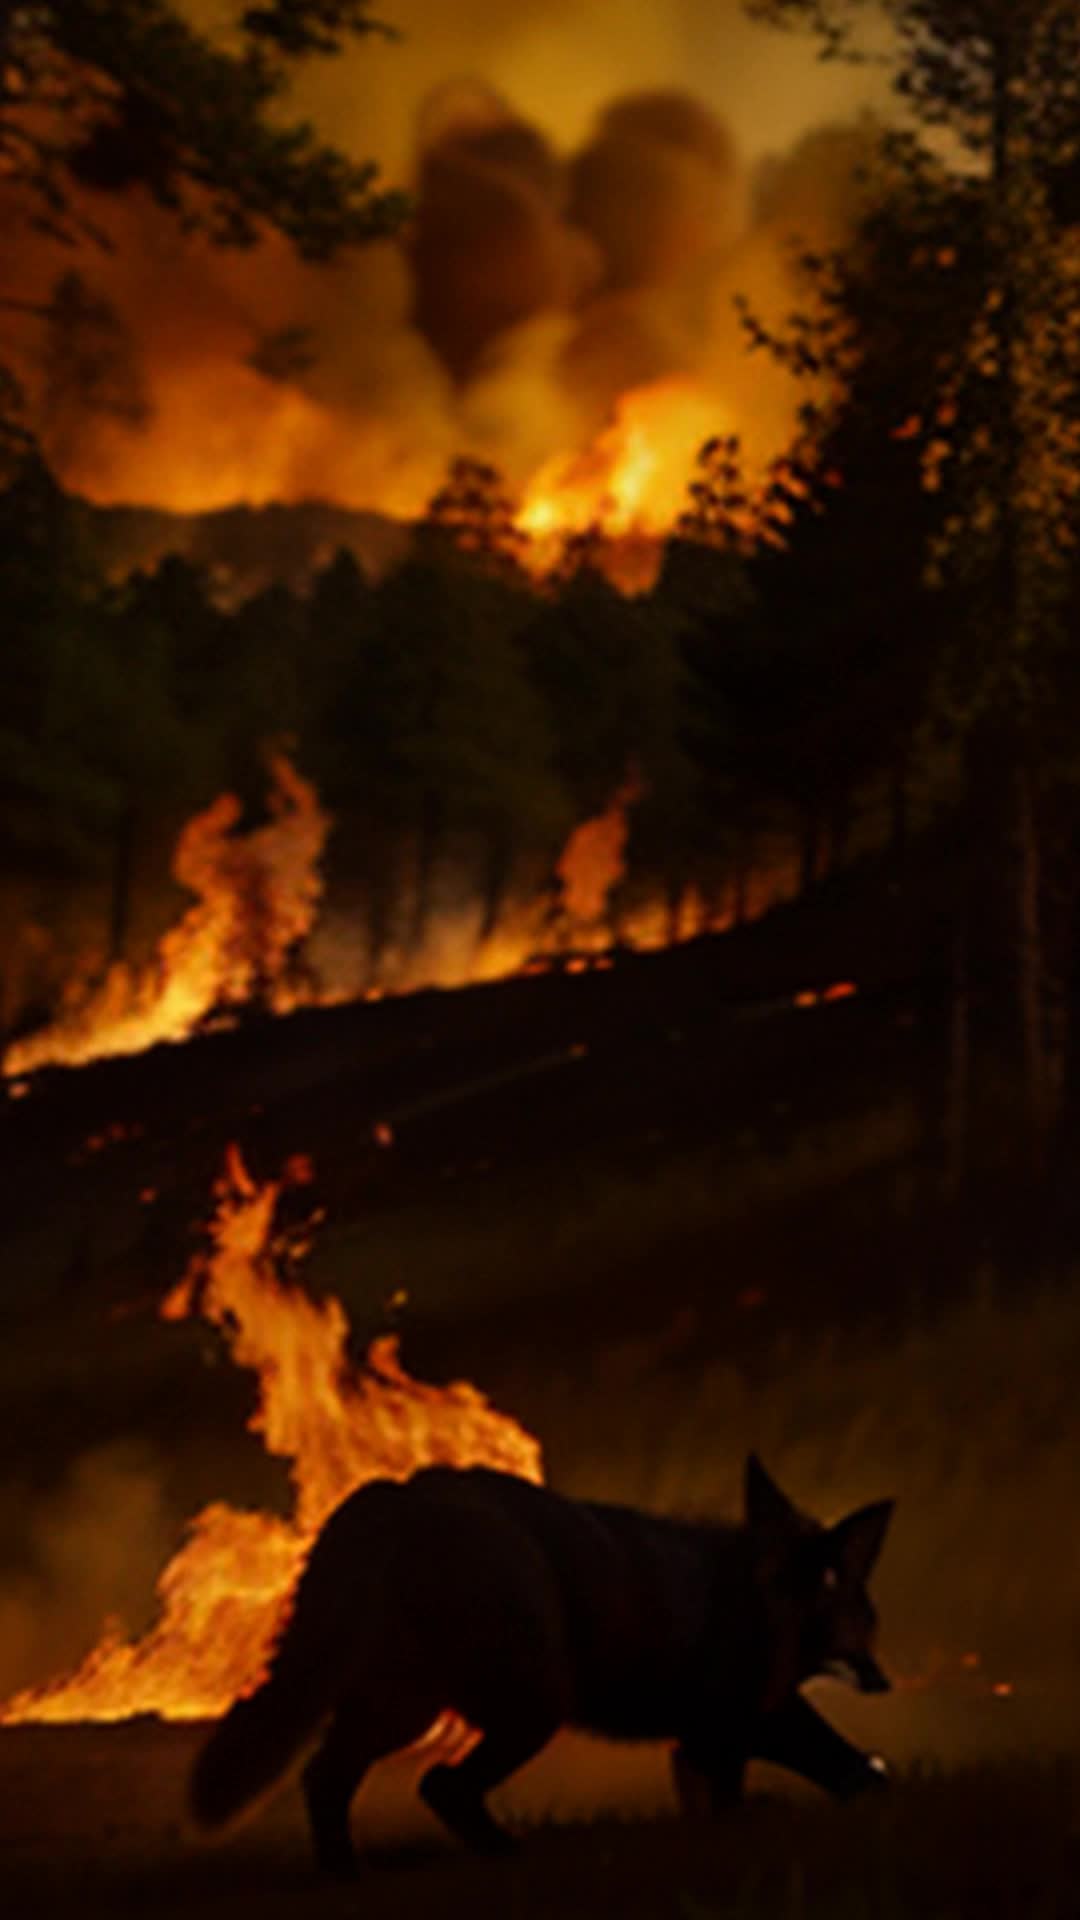 Wildfire approaching dense forest, agile fox leading concerted effort, animals coordinating with humans, dramatic, urgent, teamwork, creating defensive barrier against flames, vivid orange and red hues of wildfire, contrast with green forest, sunset lighting, dynamic action, high resolution